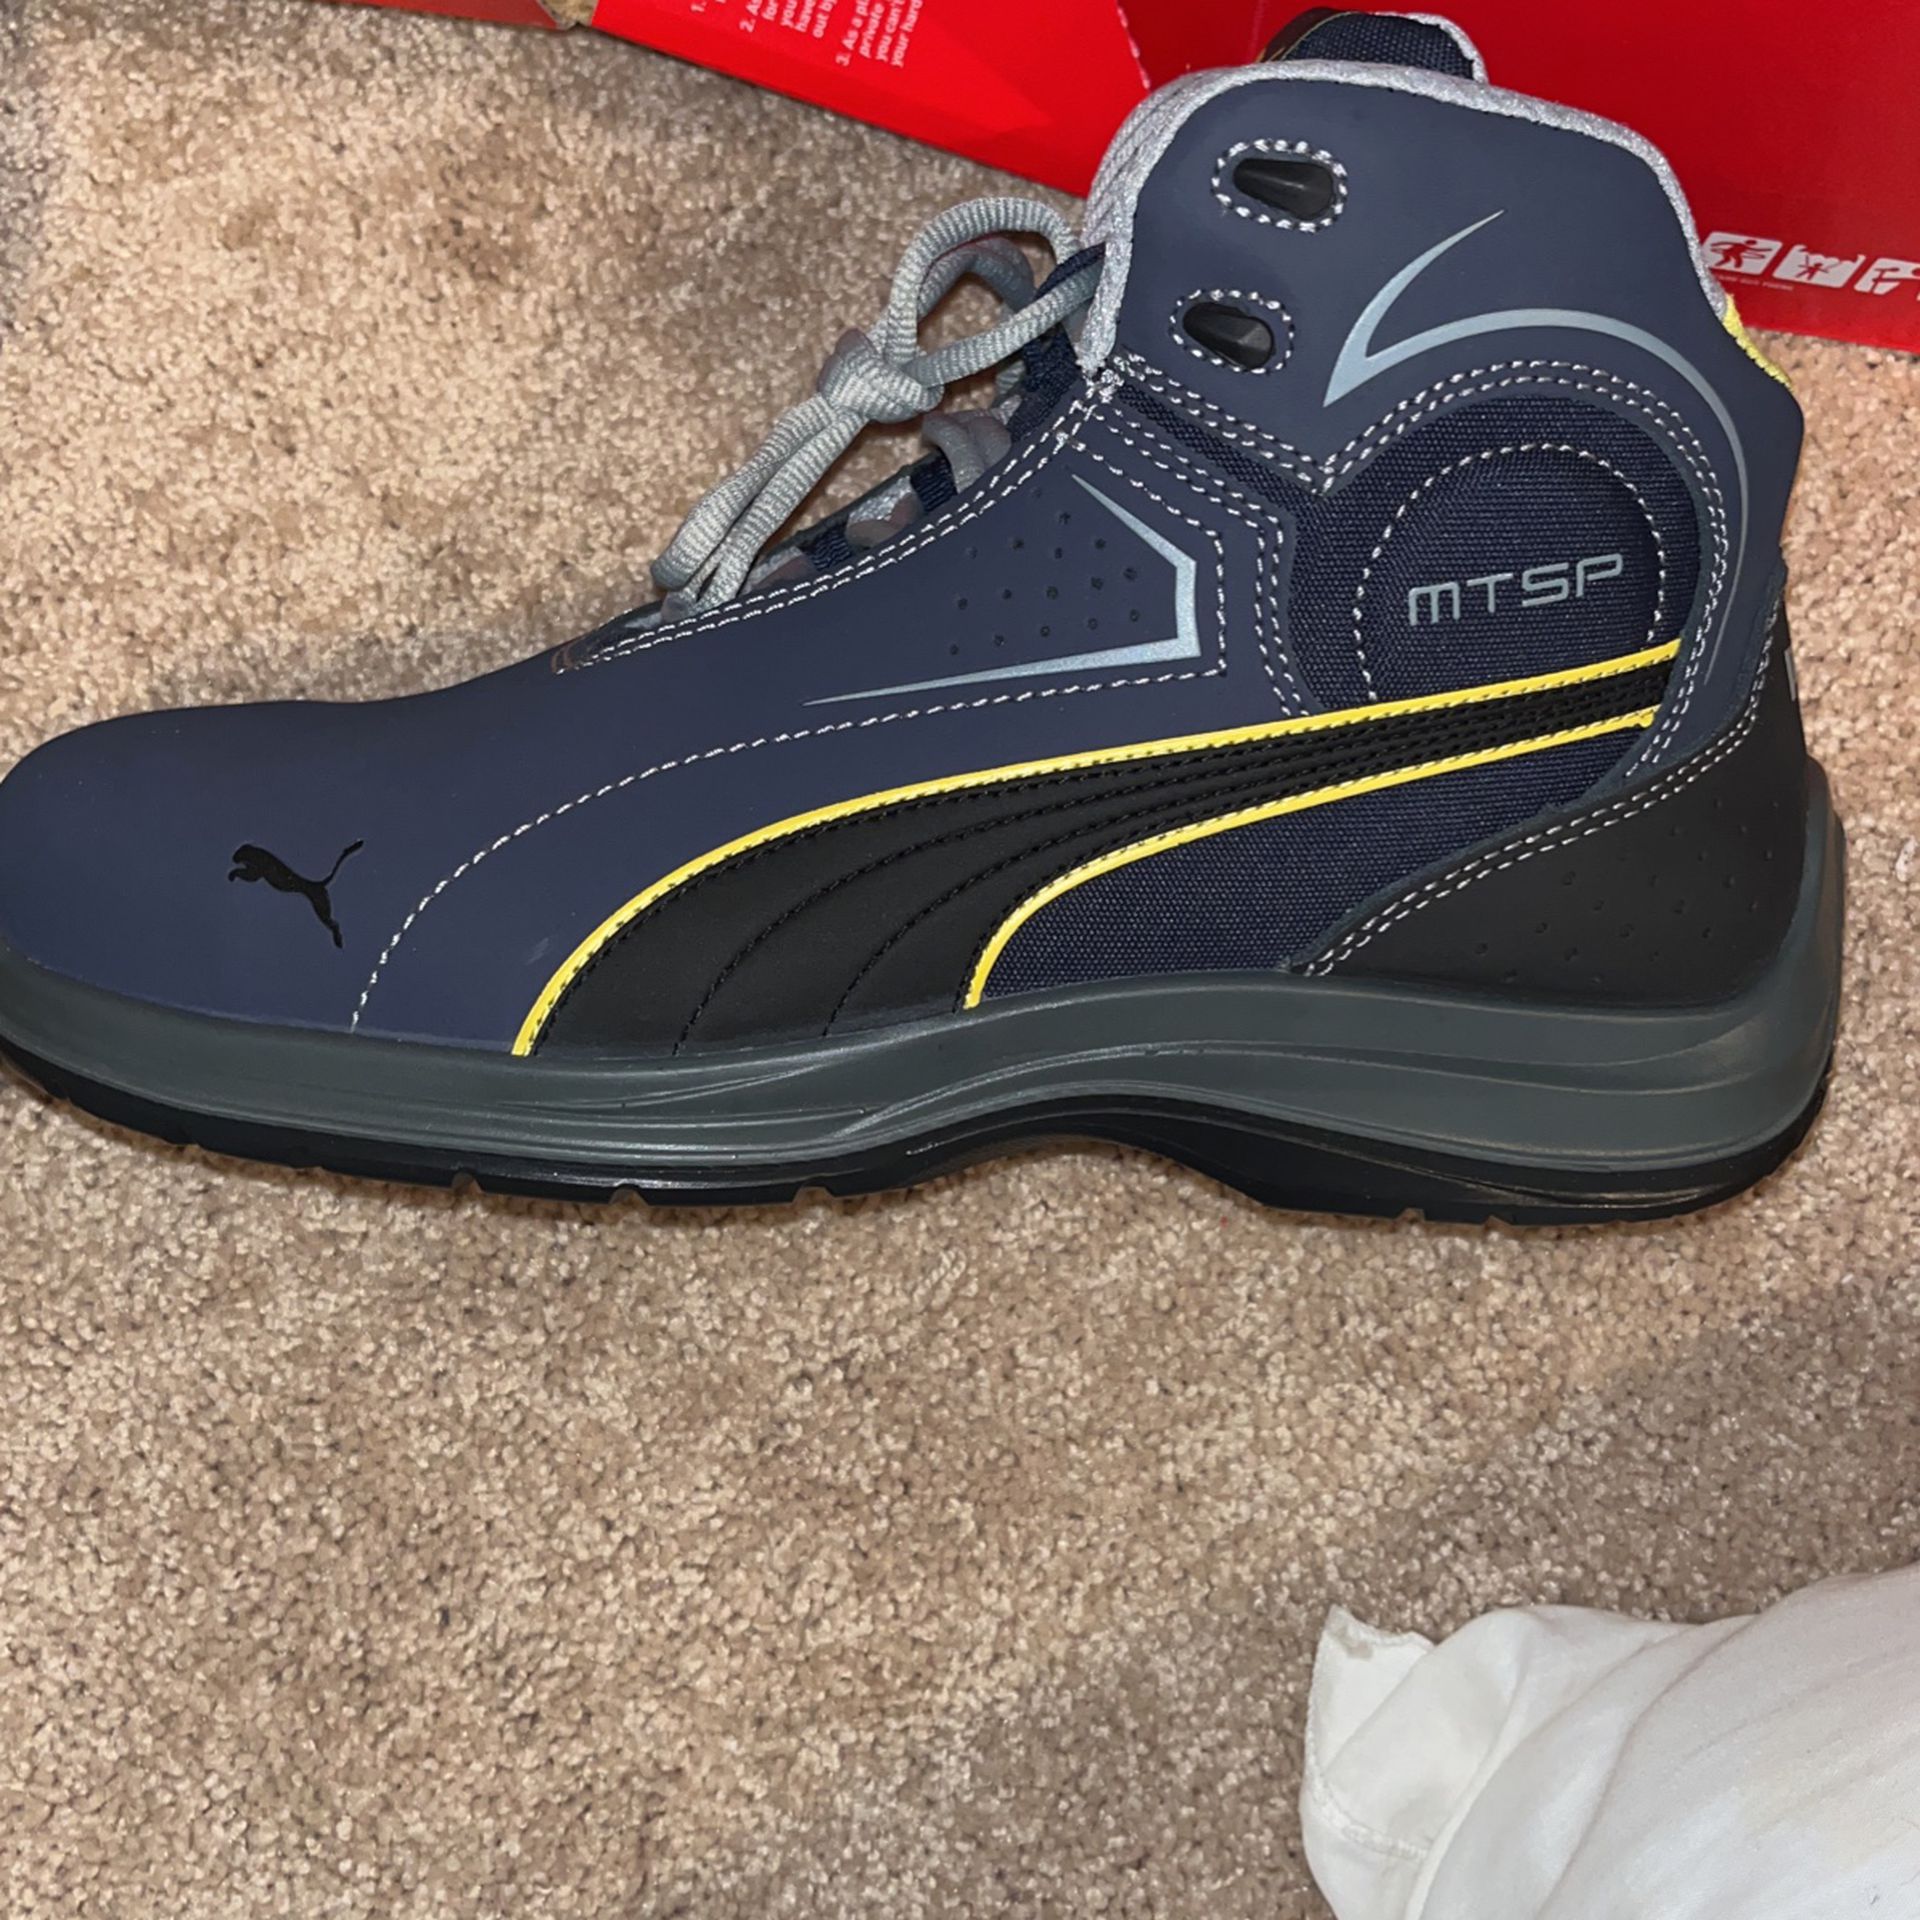 Puma Work Boots New for Sale in Charlotte, NC - OfferUp